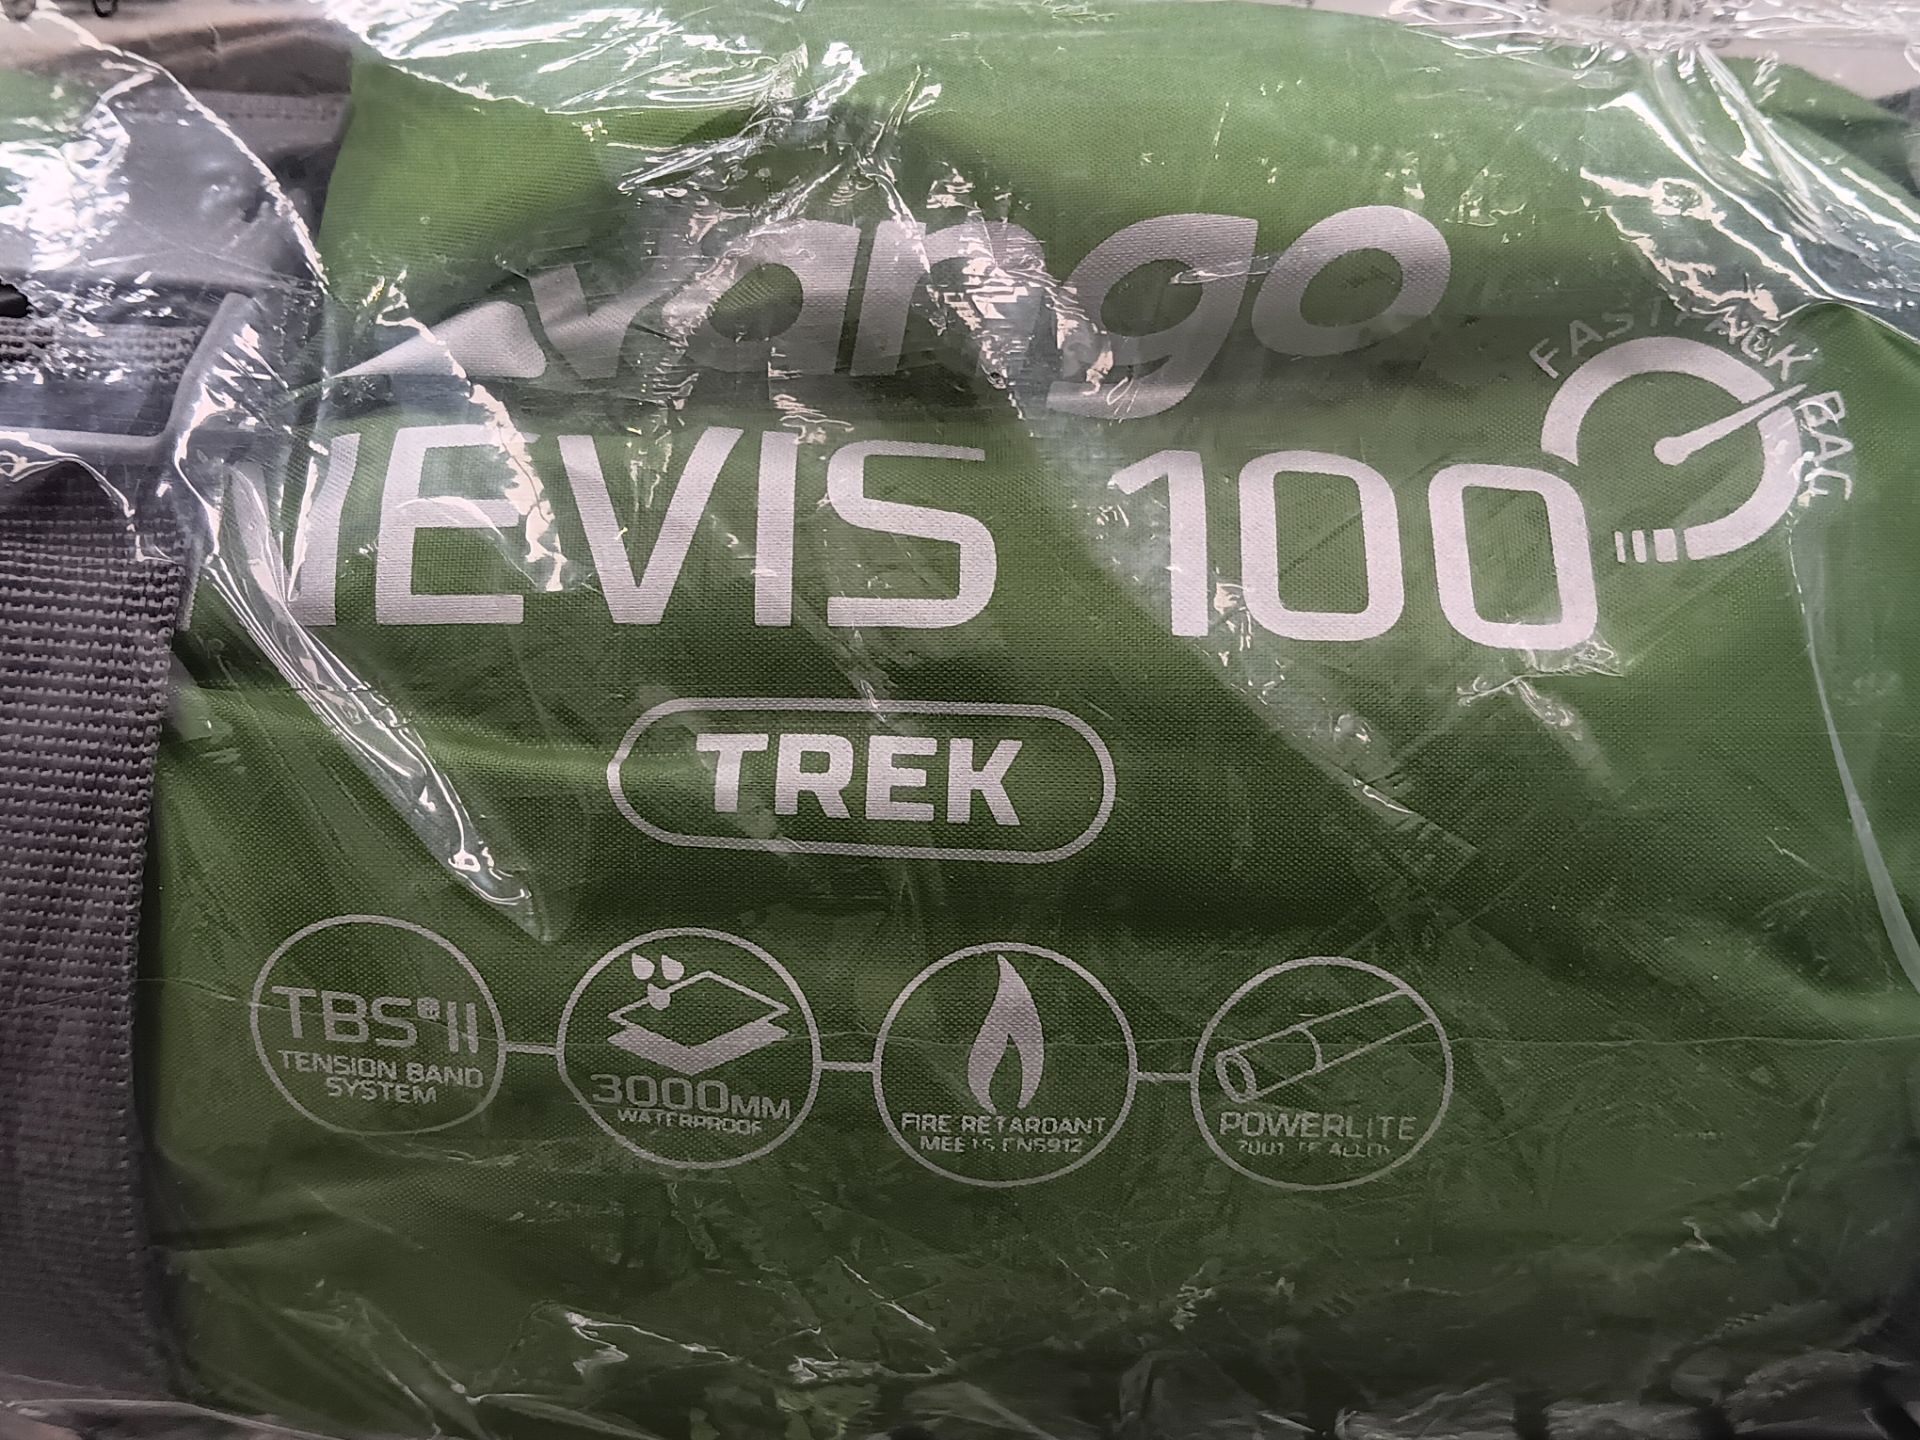 Vango Nevis 100 Trek Tent (Please note, Viewing Strongly Recommended - Eddisons have not inspected - Bild 2 aus 2